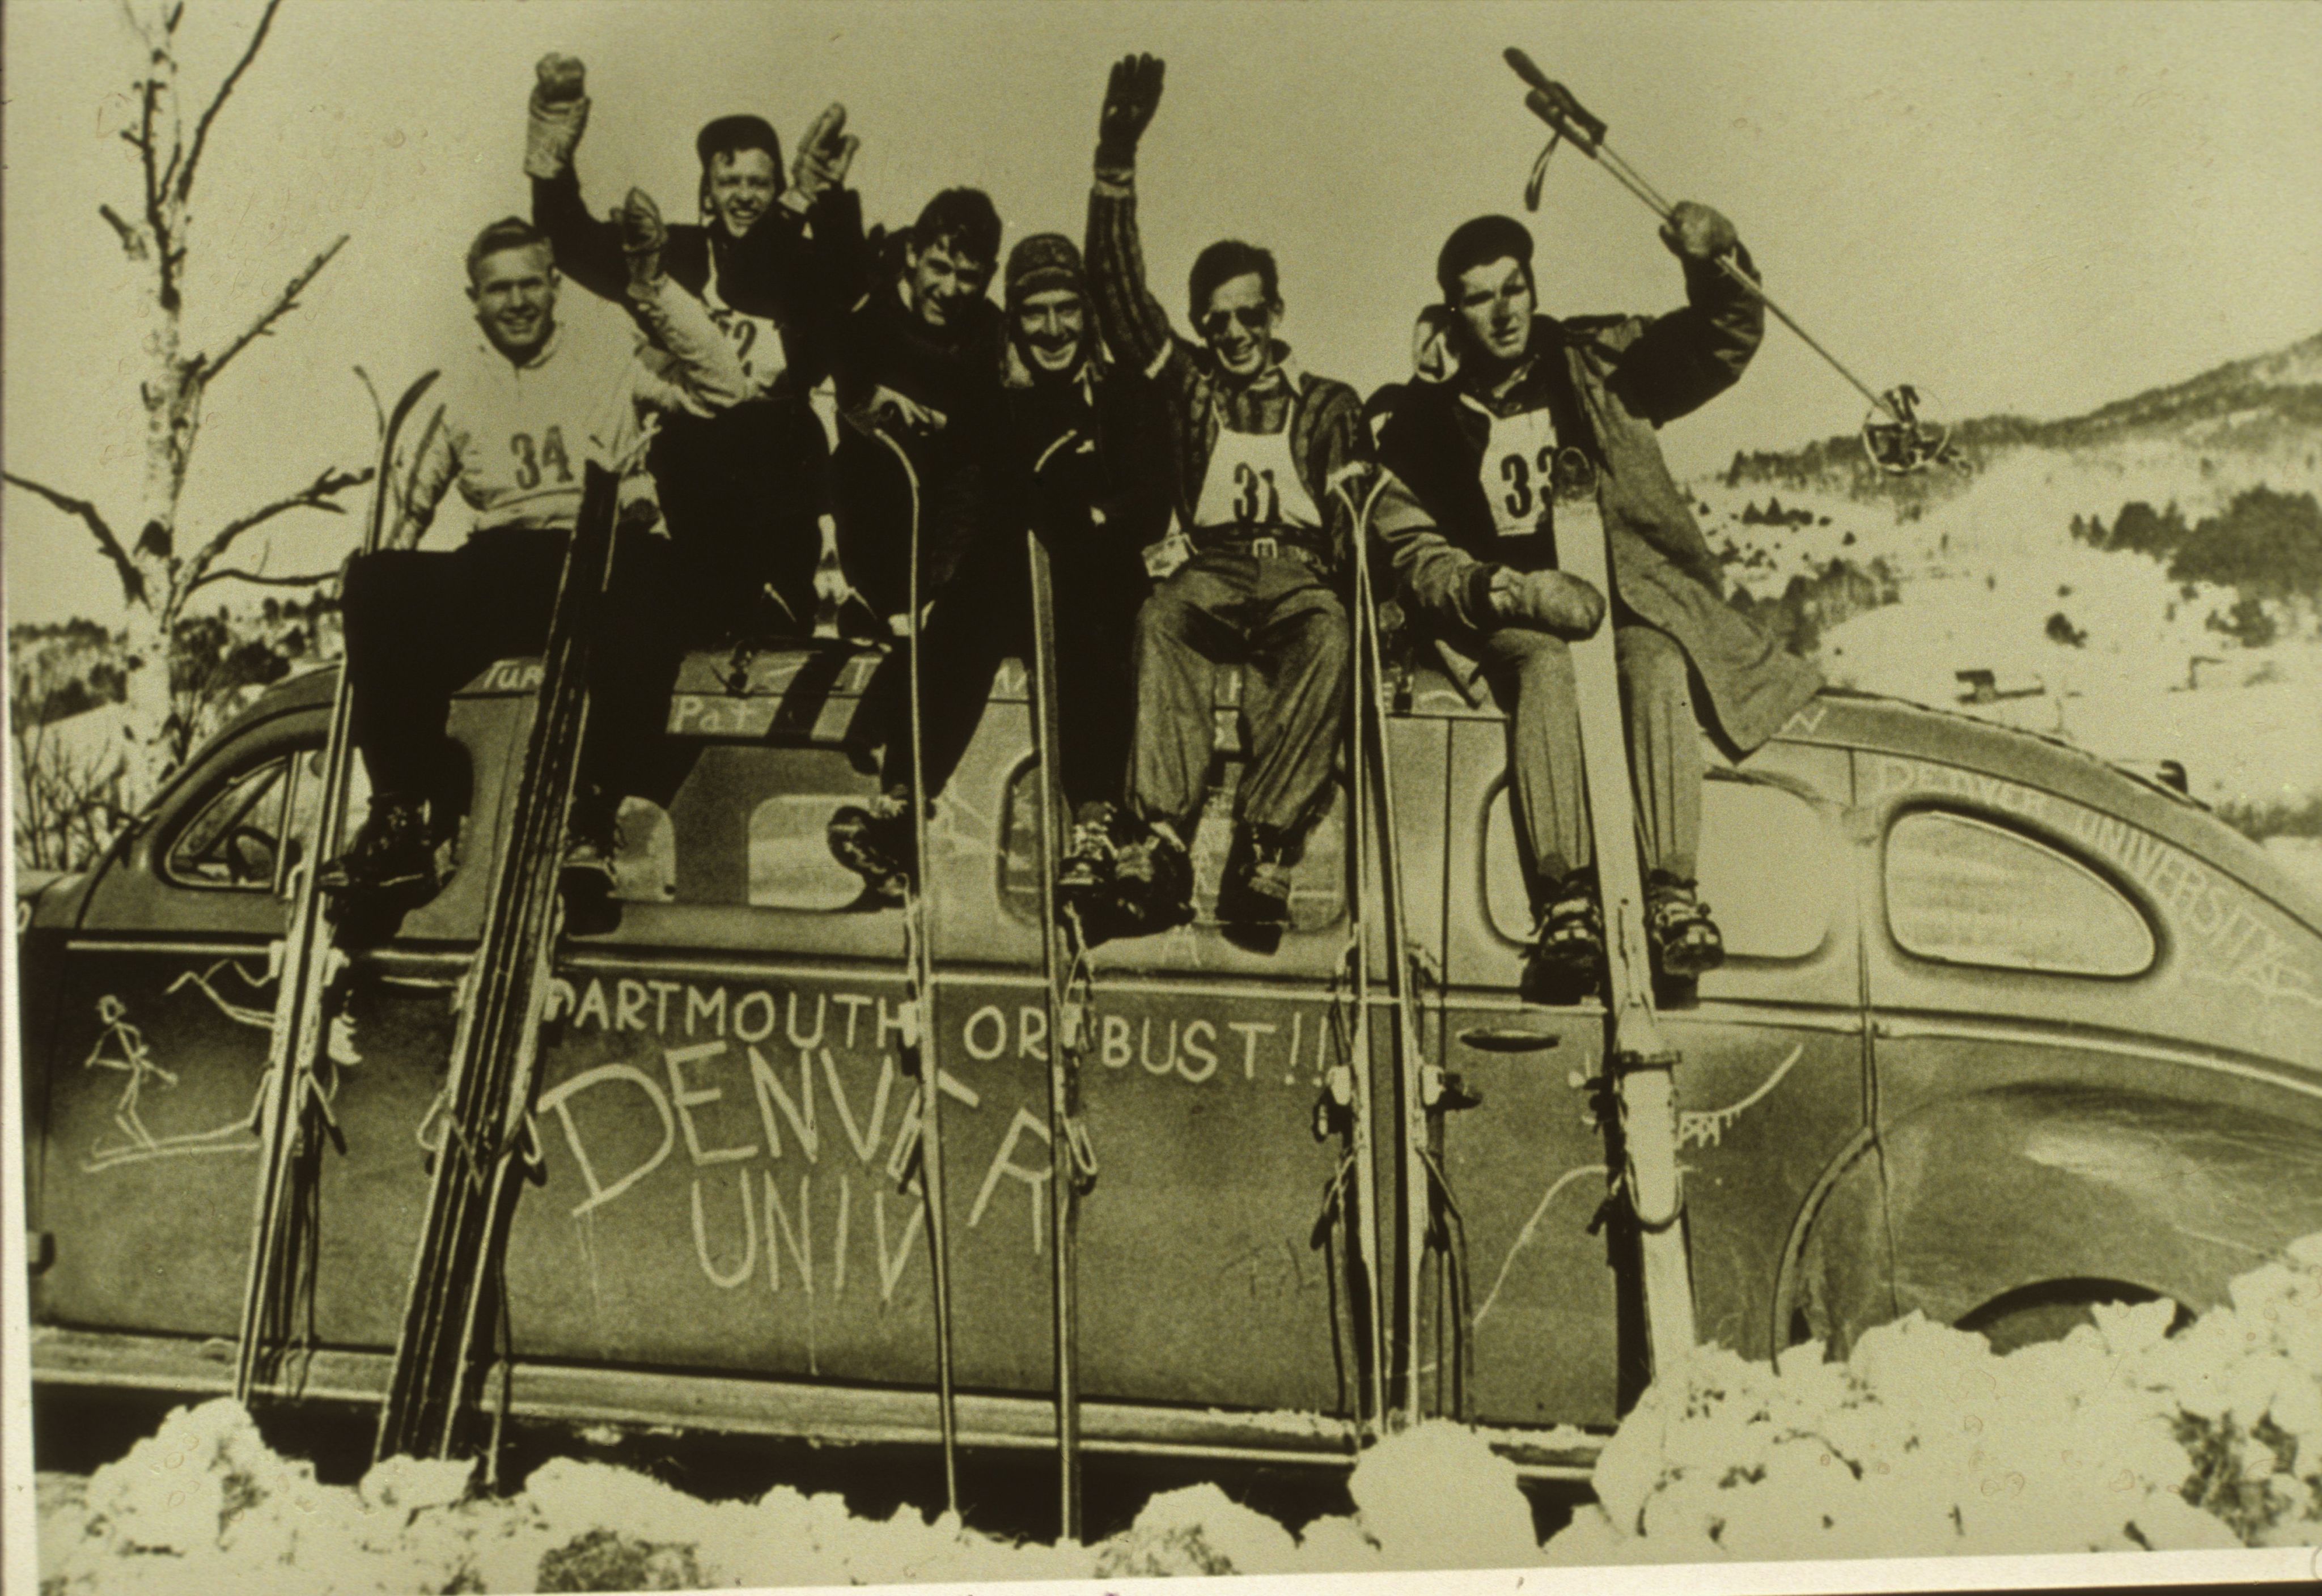 DU ski team stis on top of car in the 1960's with a "Dartmouth or Bust" written on the car